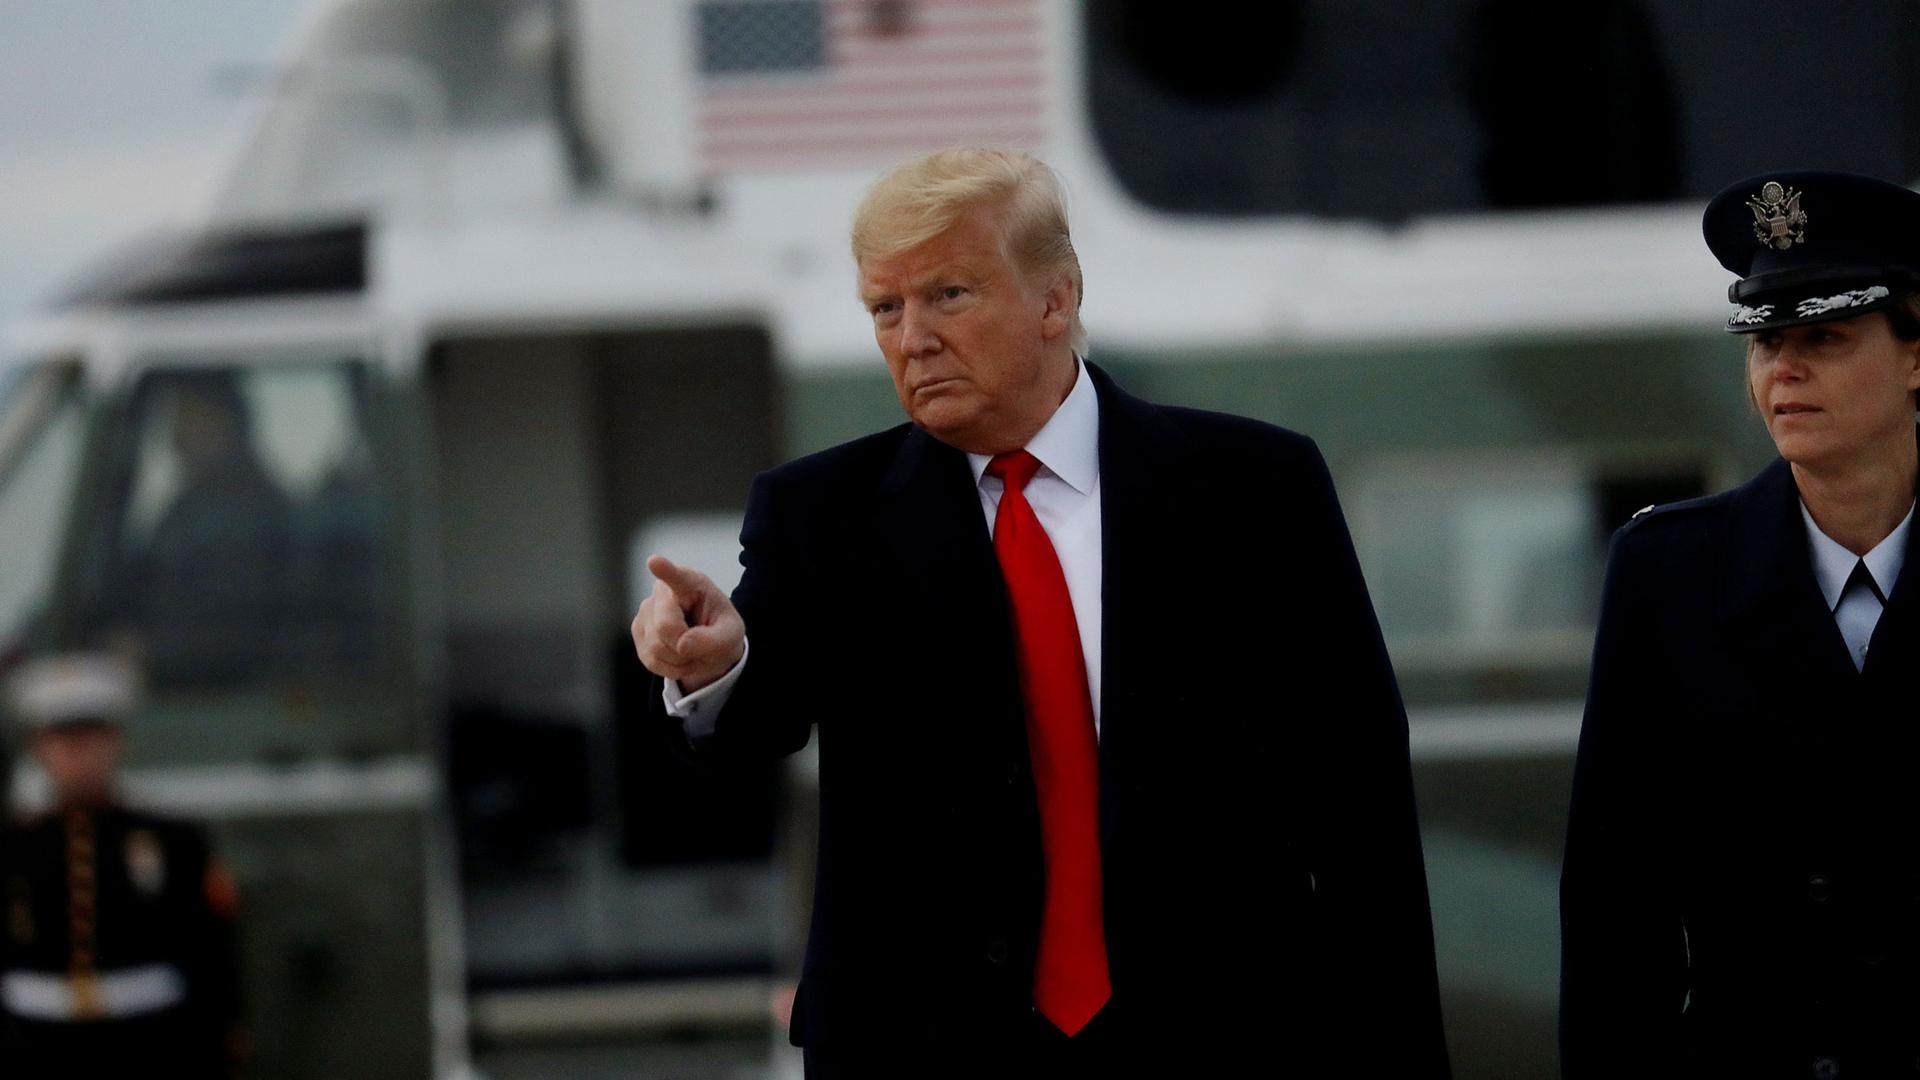 US President Donald Trump is shown pointing with his right hand and wearing a dark jacket and red tie.